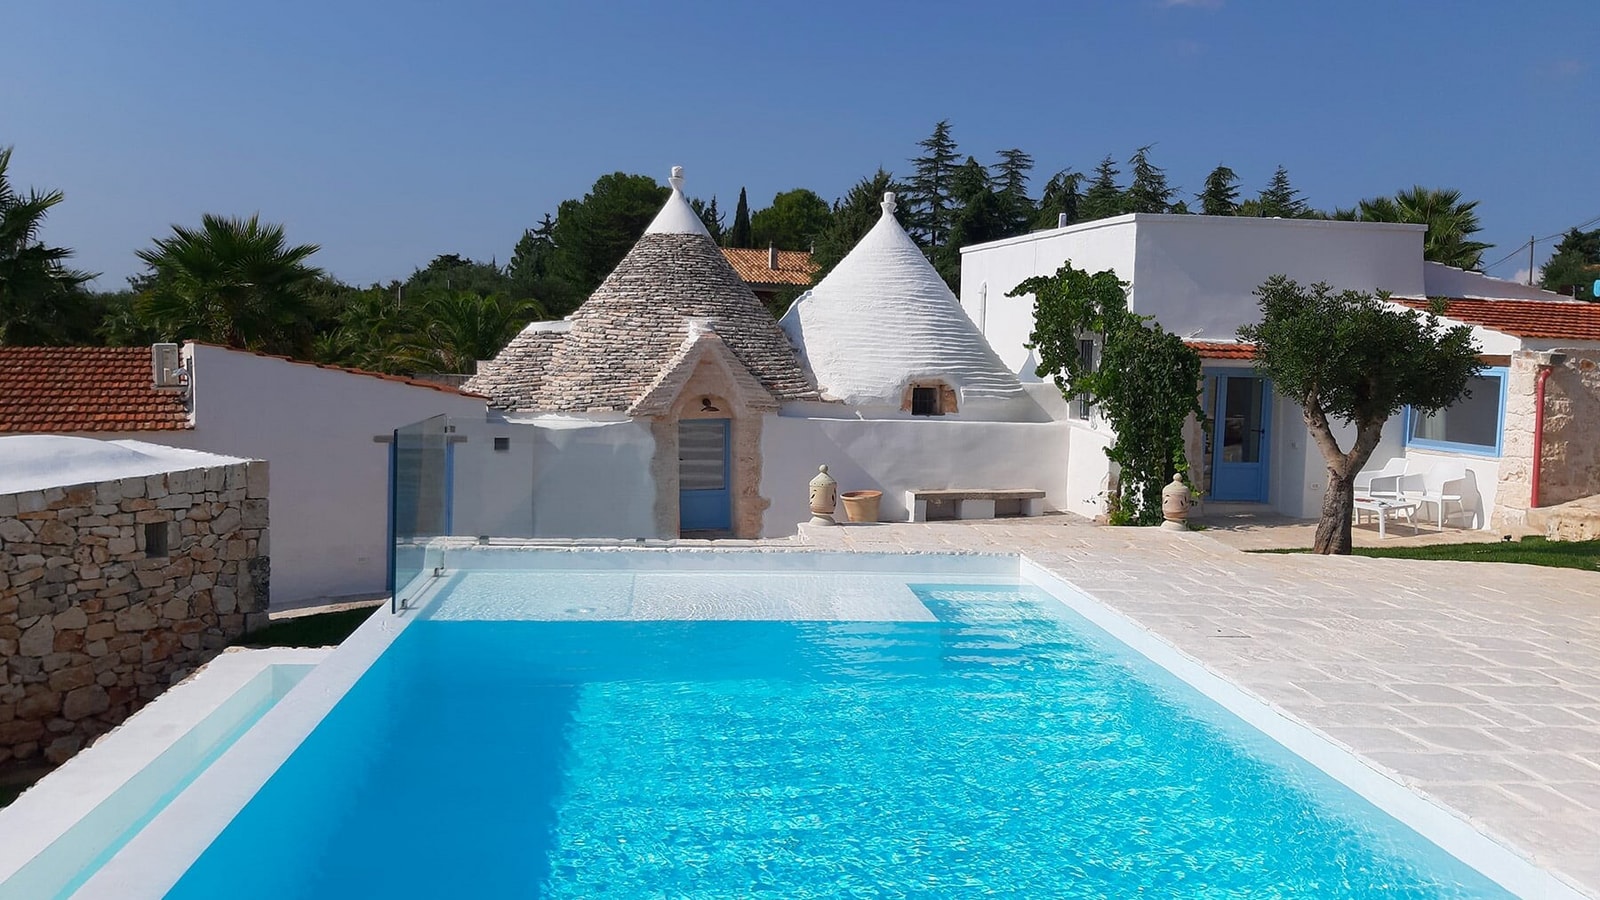 Discover Top Luxury Villas in Puglia, Italy, for Your Dream Vacation